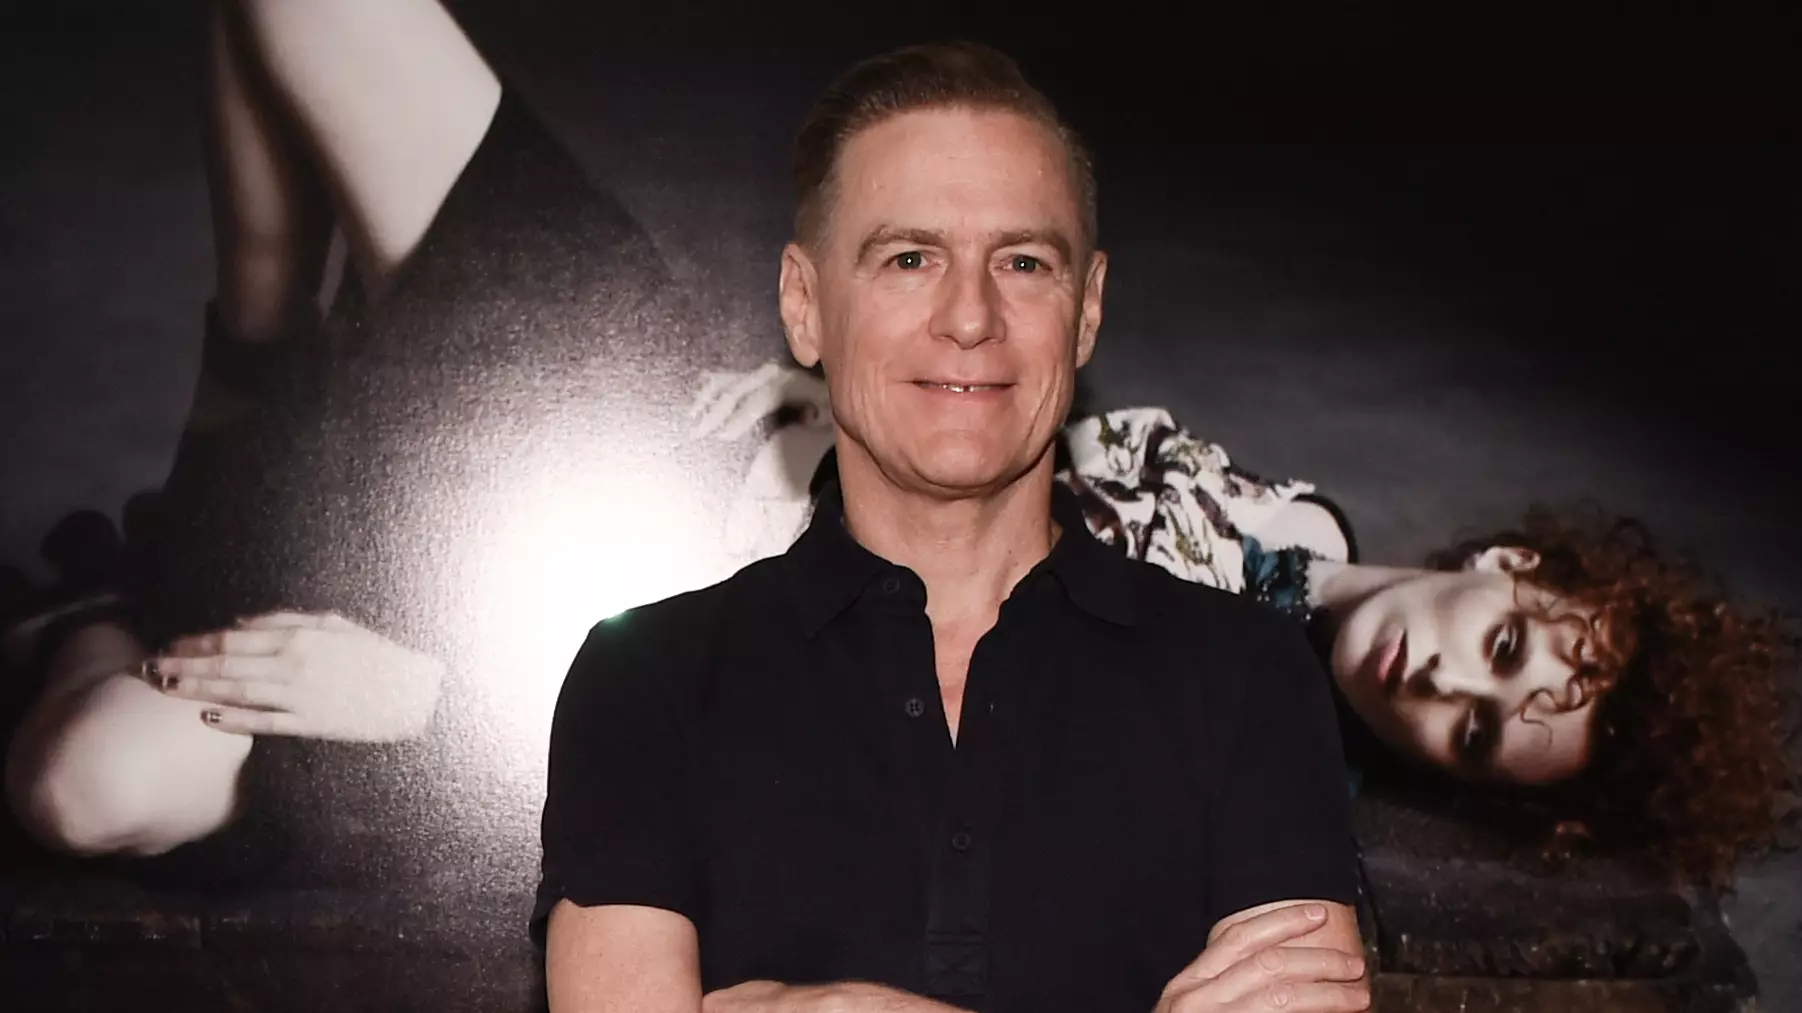 Bryan Adams Accused Of Being 'Racist' After 'Bat Eating' Outburst